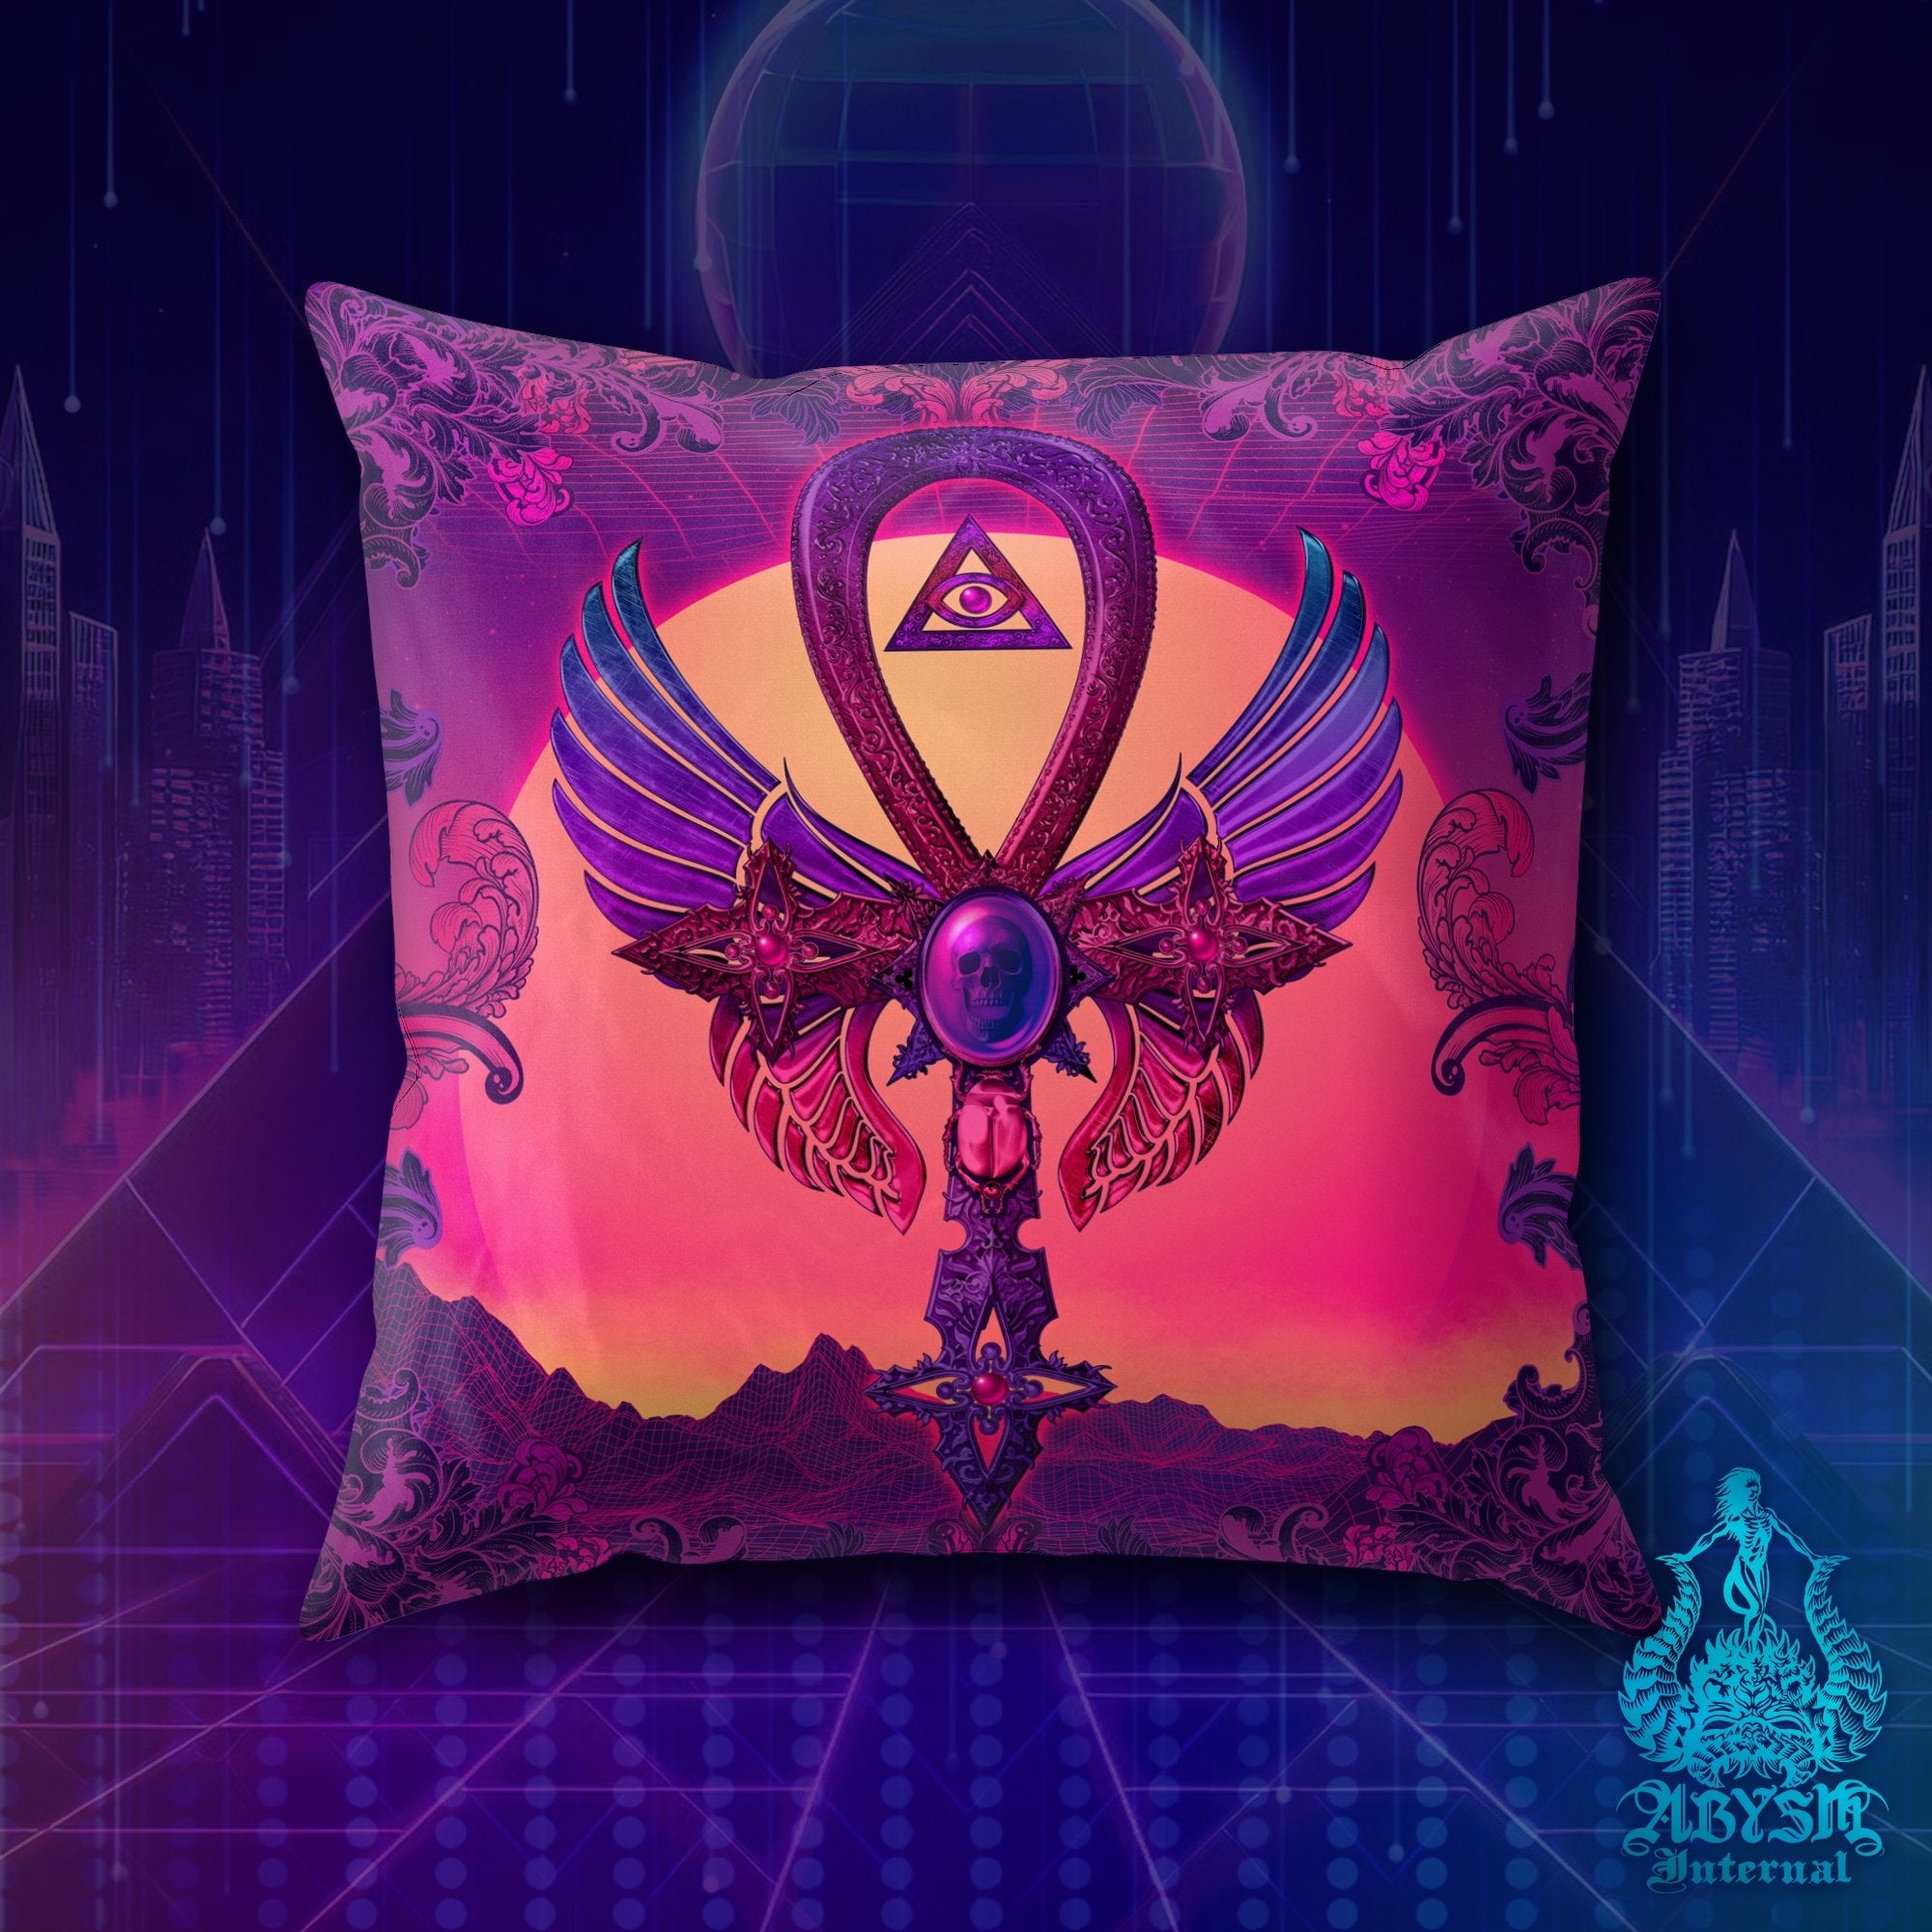 Vaporwave Throw Pillow, Synthwave Decorative Accent Cushion, Retrowave 80s Room Decor, Psychedelic Art Print - Ankh - Abysm Internal